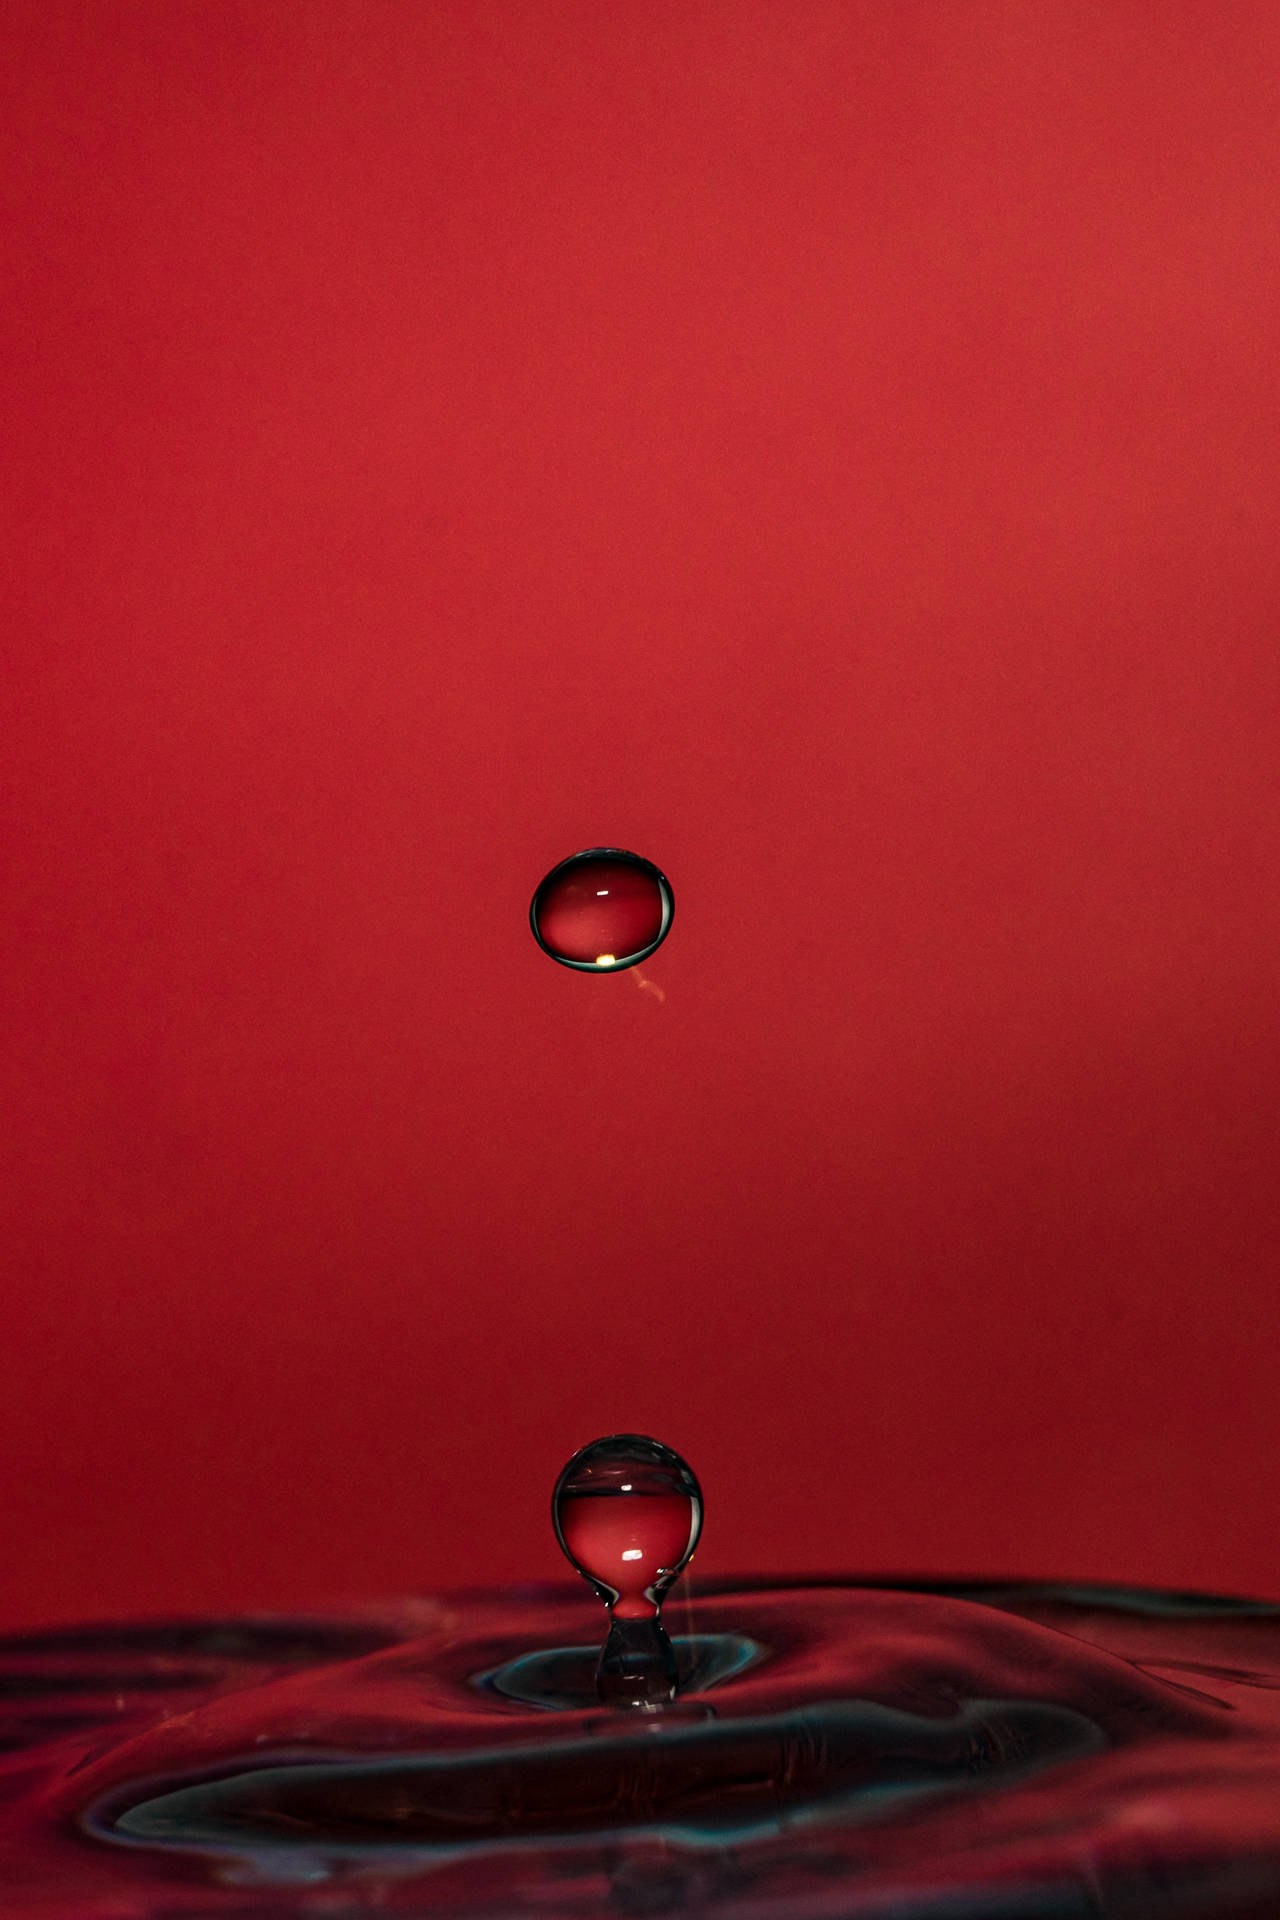 Coolest Iphone Red Water Droplets Wallpaper